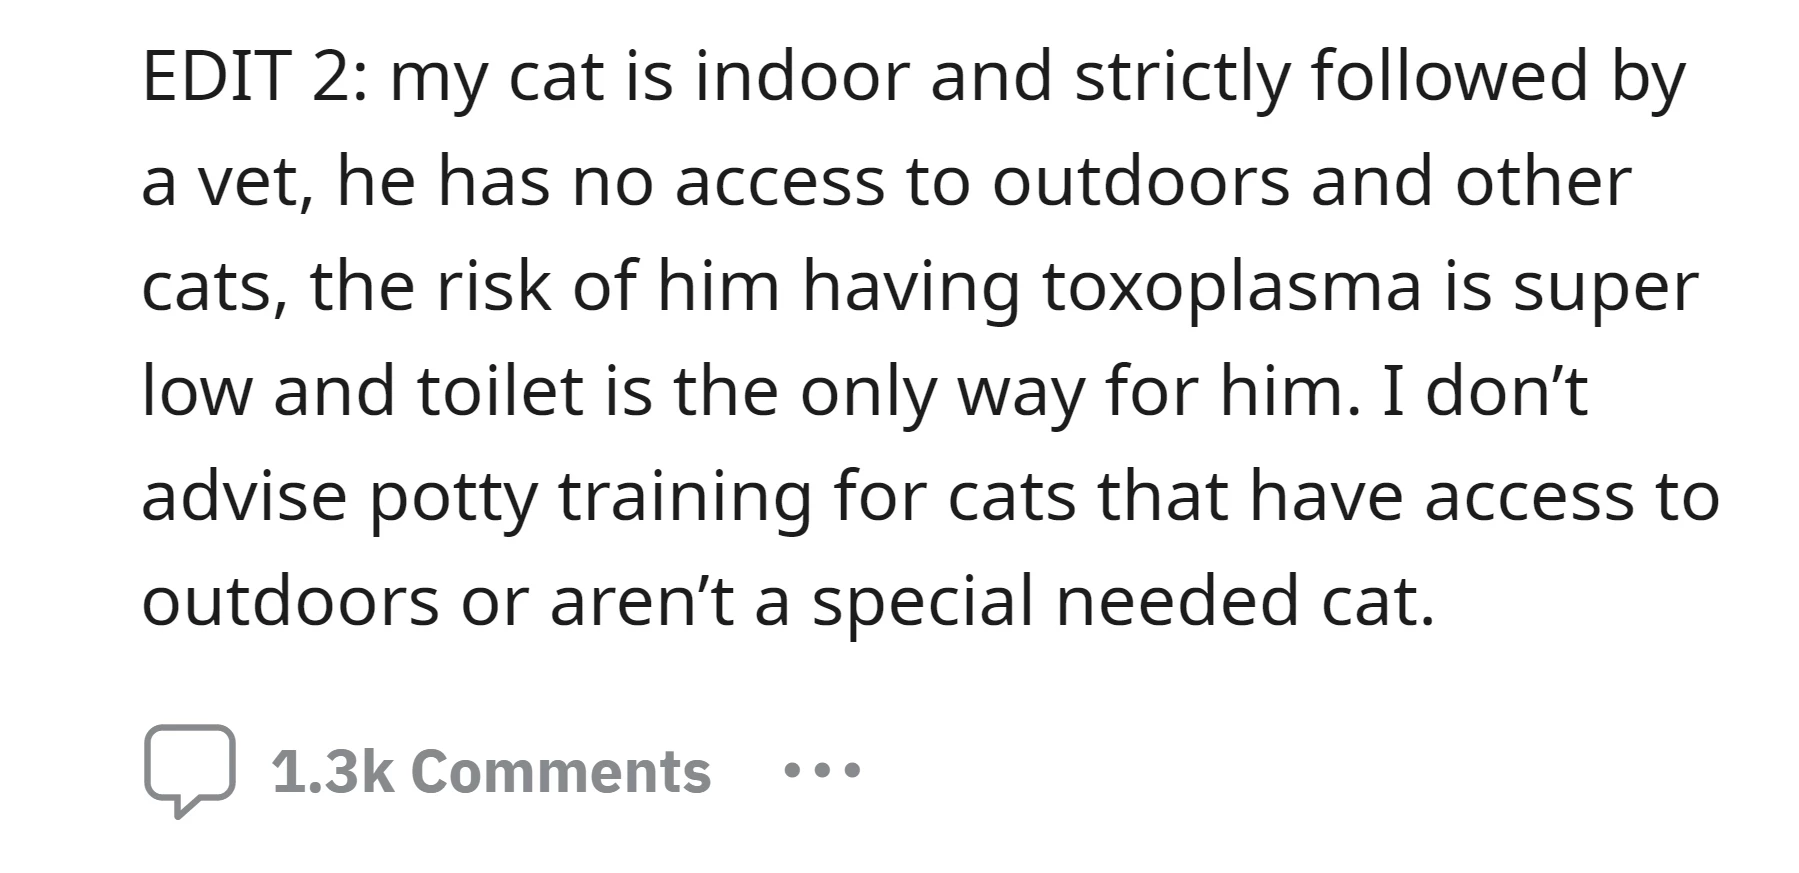 the cat has no access to outdoors